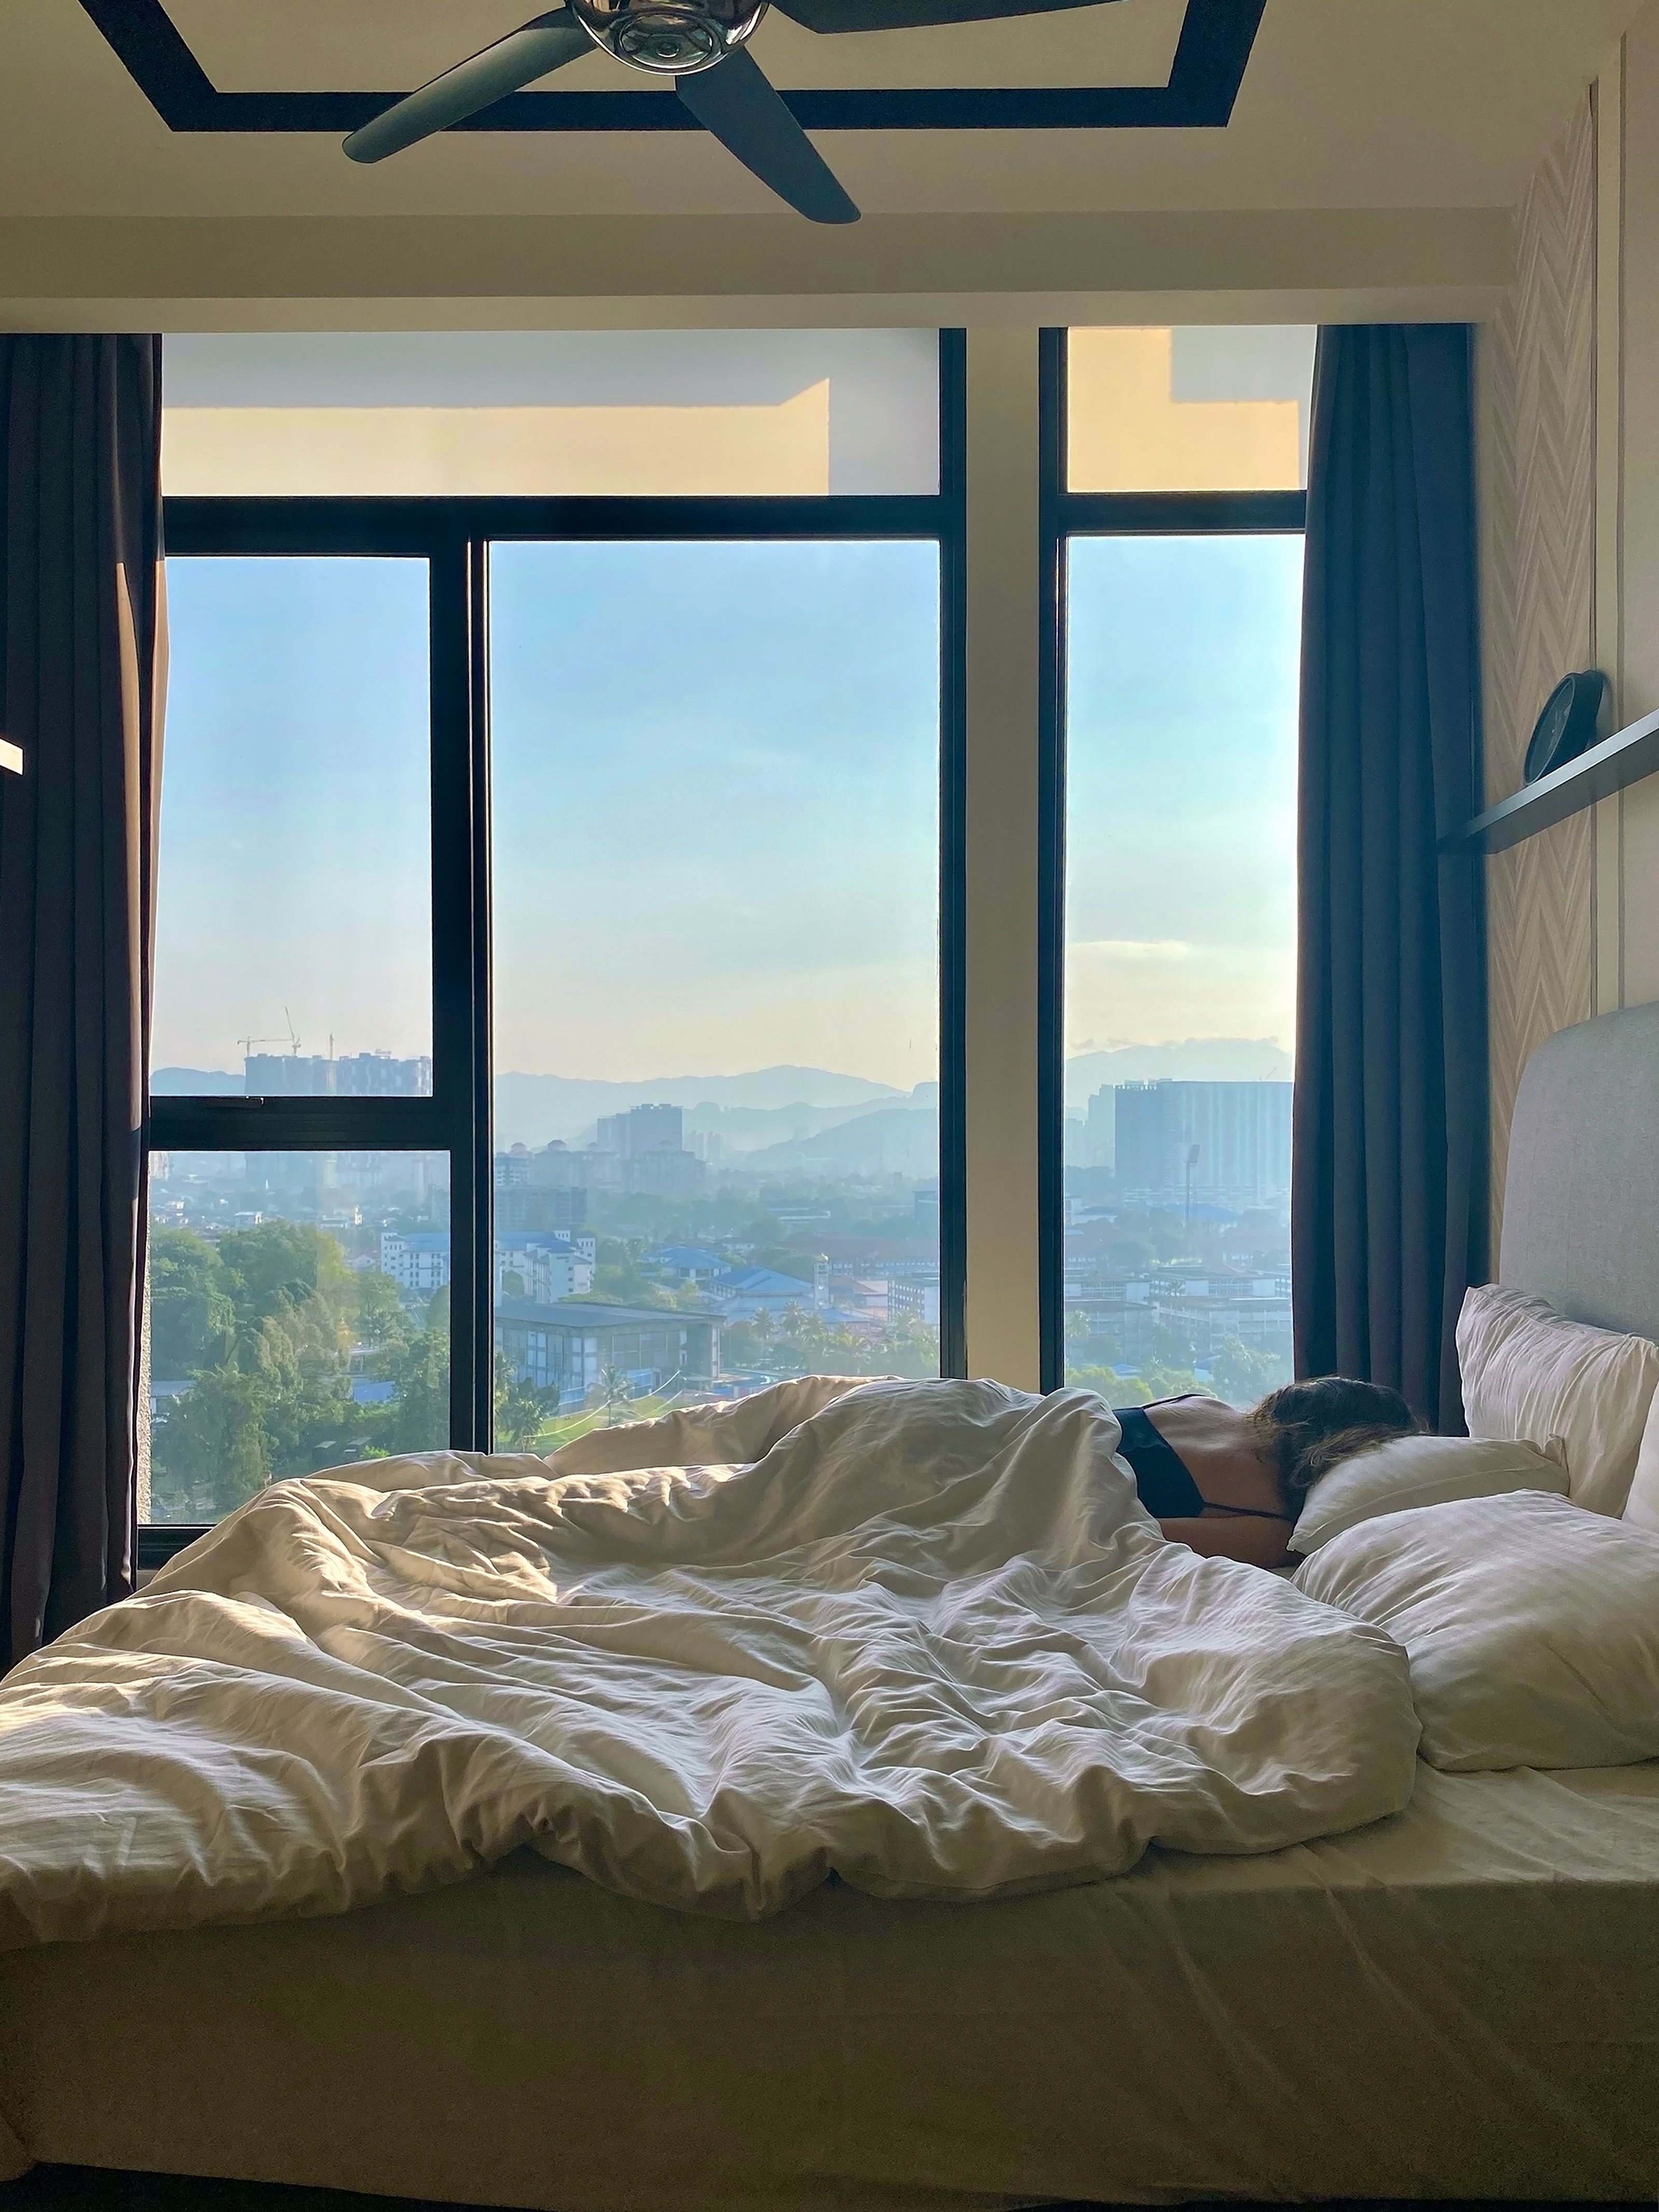 A woman sleeping with her back on the bed in front of a large window during the daytime.